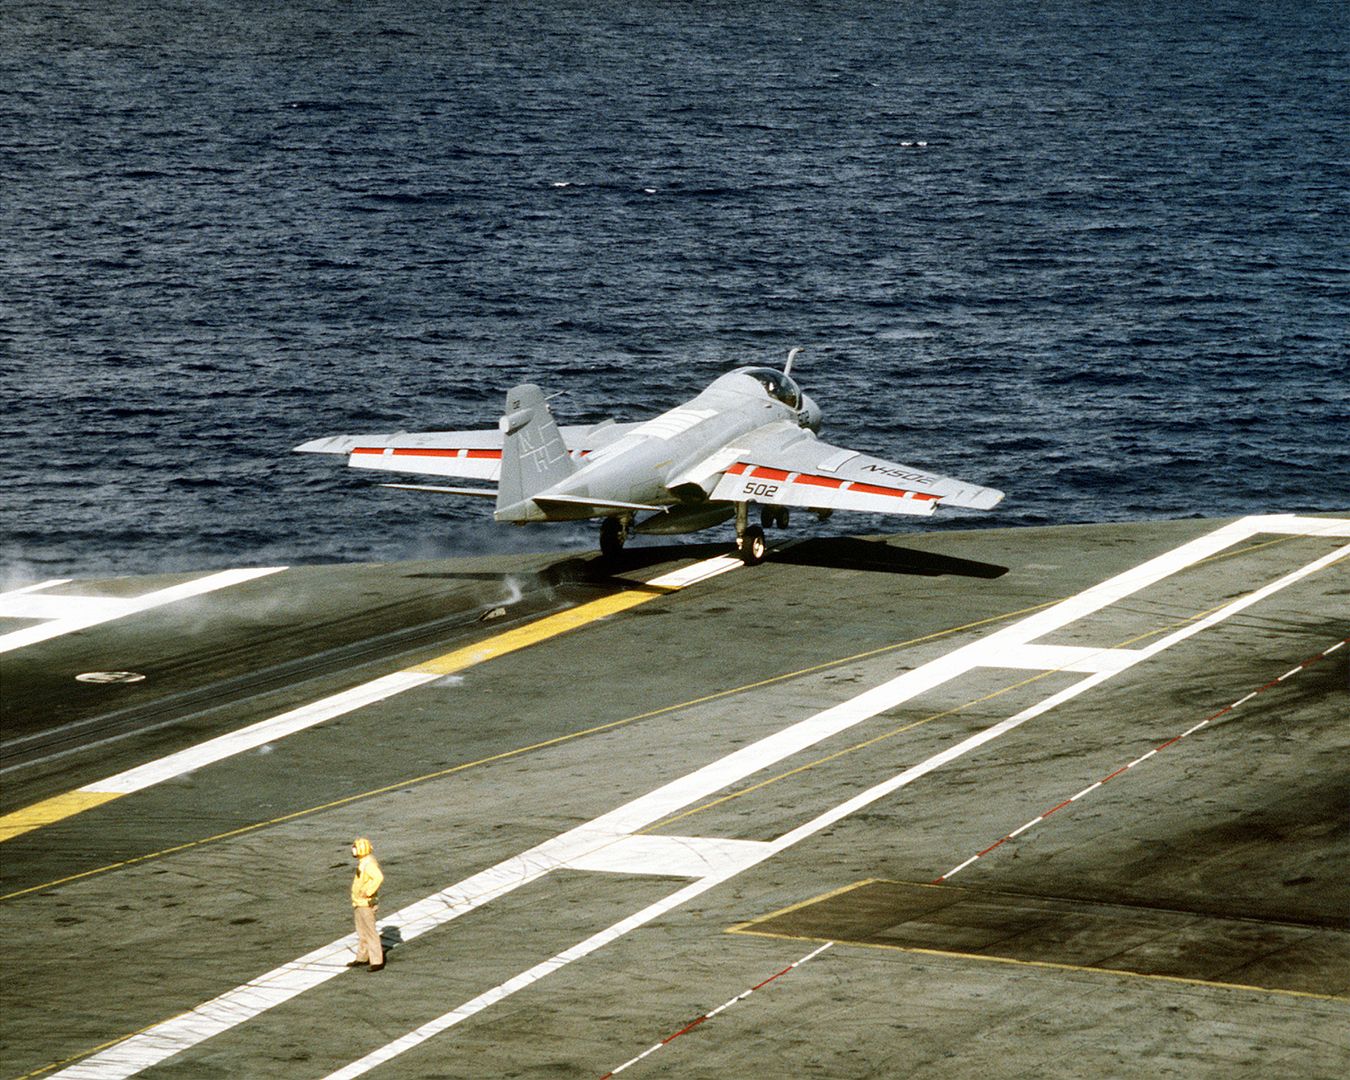  3 Catapult On The Flight Deck Of The Nuclear Powered Aircraft Carrier USS ABRAHAM LINCOLN